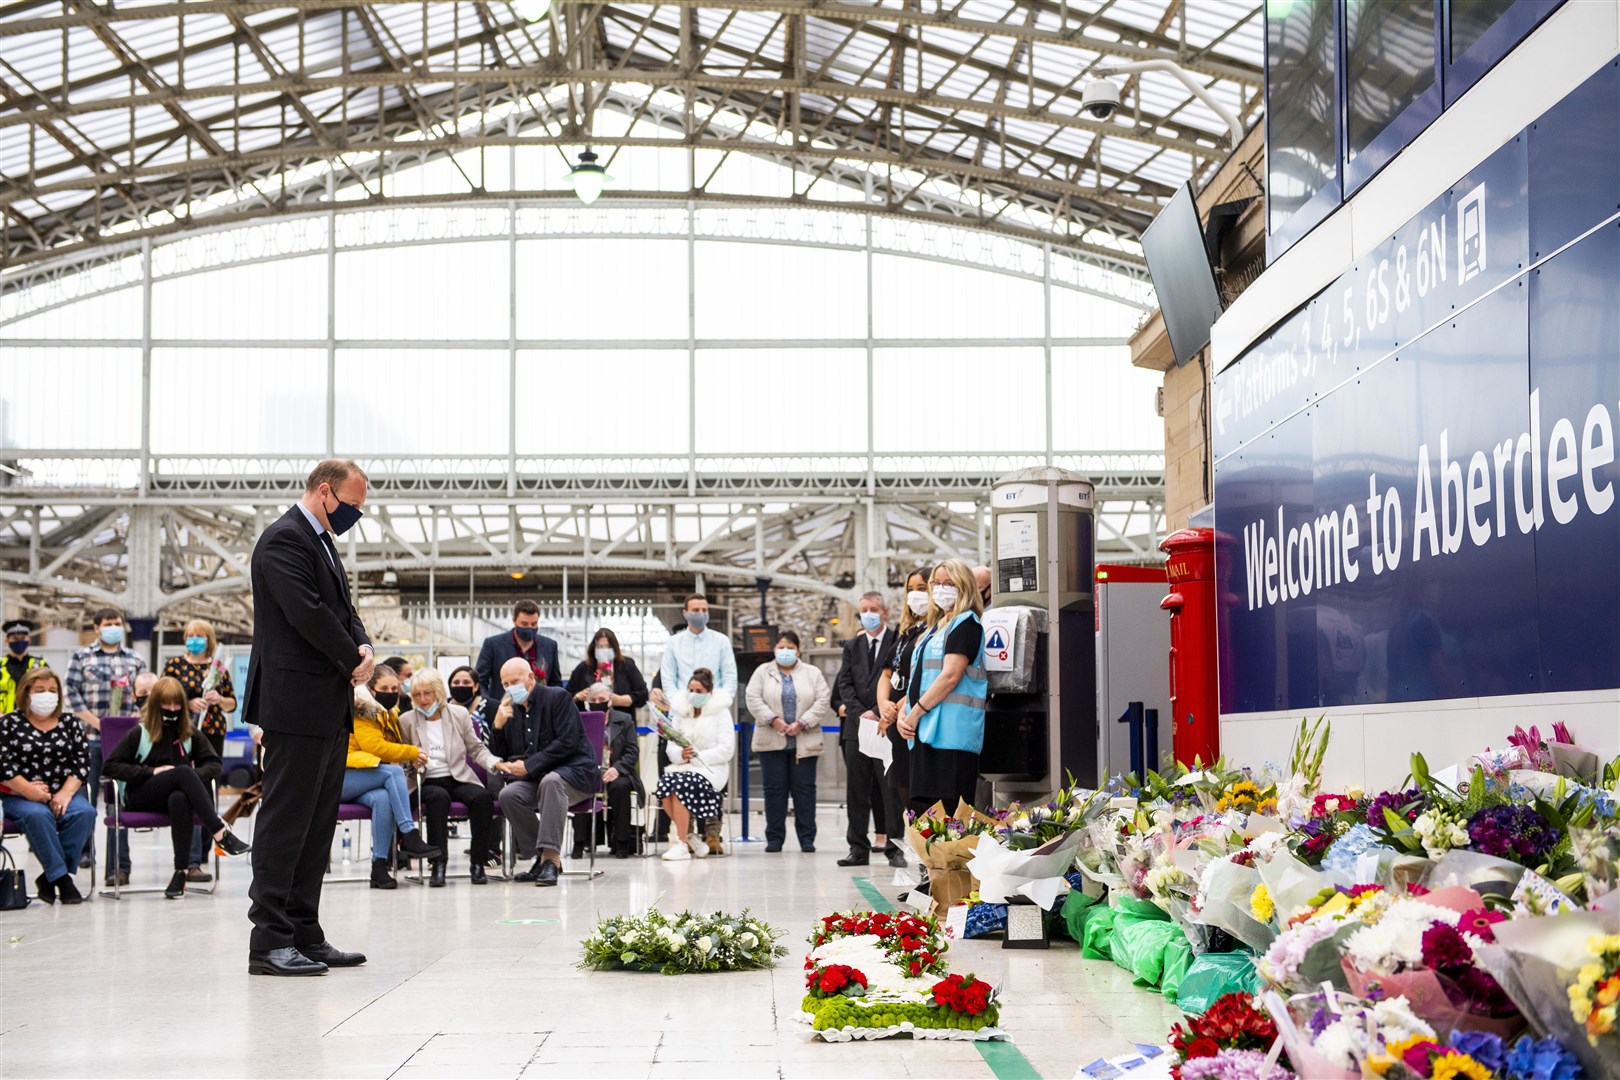 Alex Hynes, managing director of Scotland’s Railway lays at wreath at Aberdeen station as the railway remembers those who lost their lives in the Stonehaven derailment last Wednesday. (ScotRail/SNS)